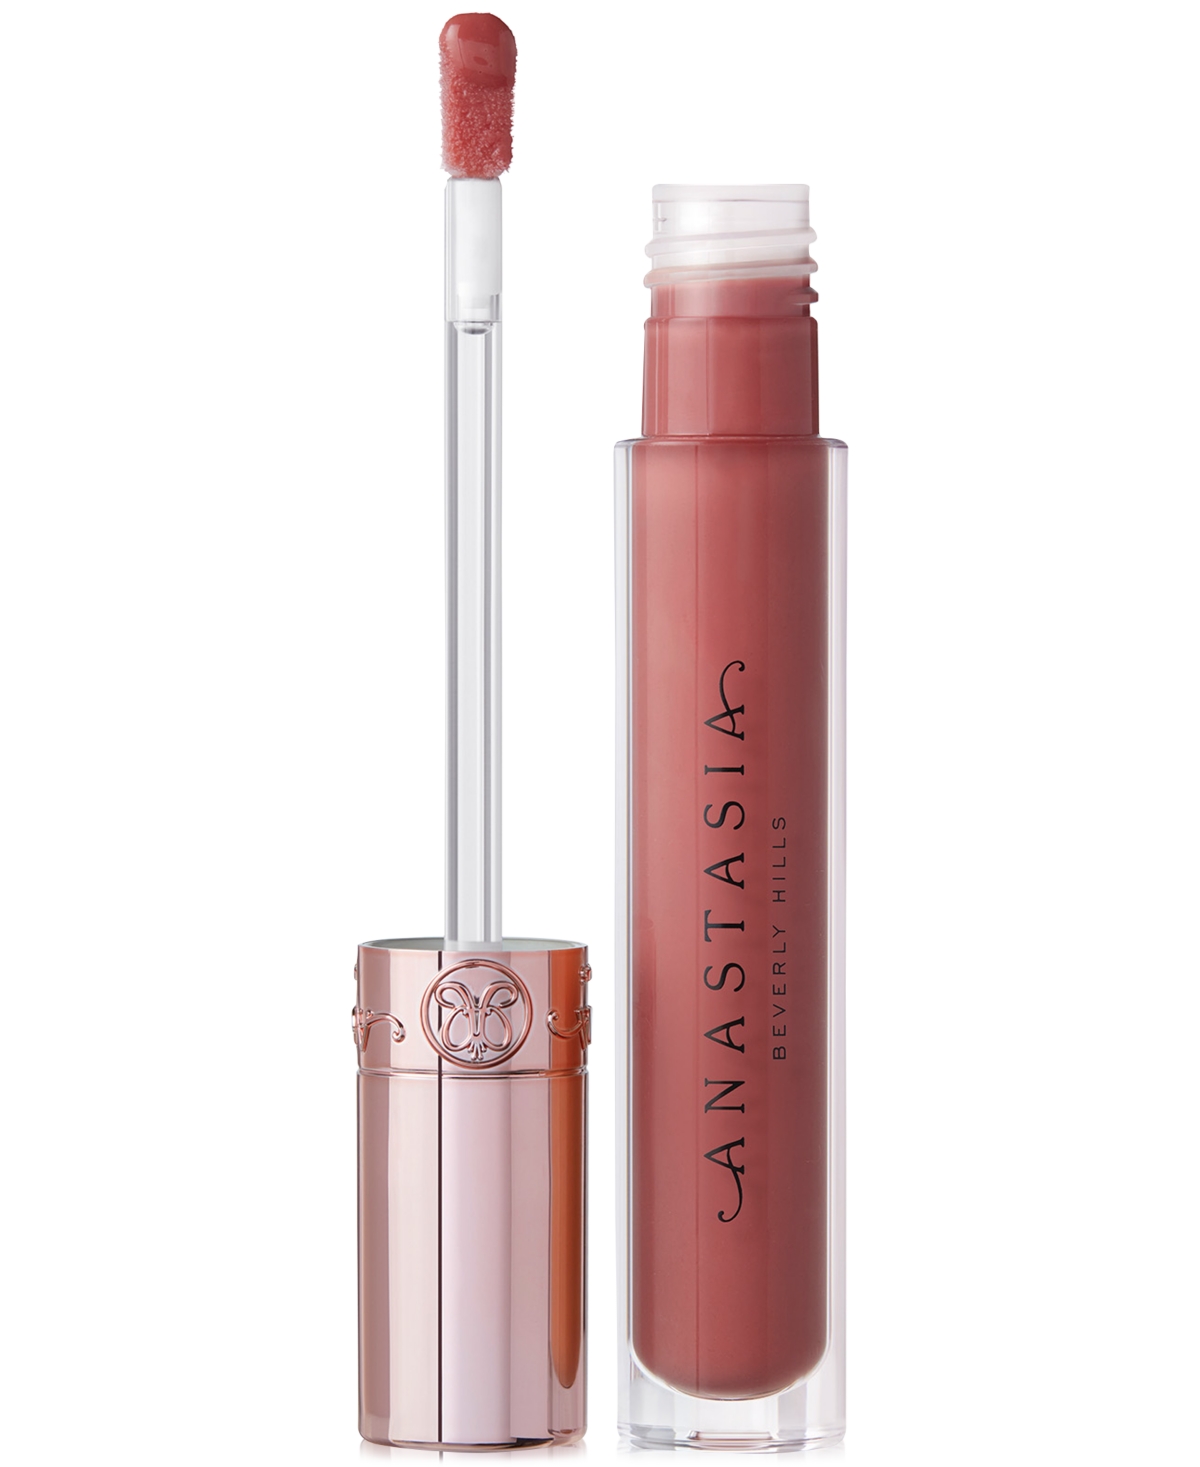 Anastasia Beverly Hills Tinted Lip Gloss In Tan Rose (neutral Rosy Pink)